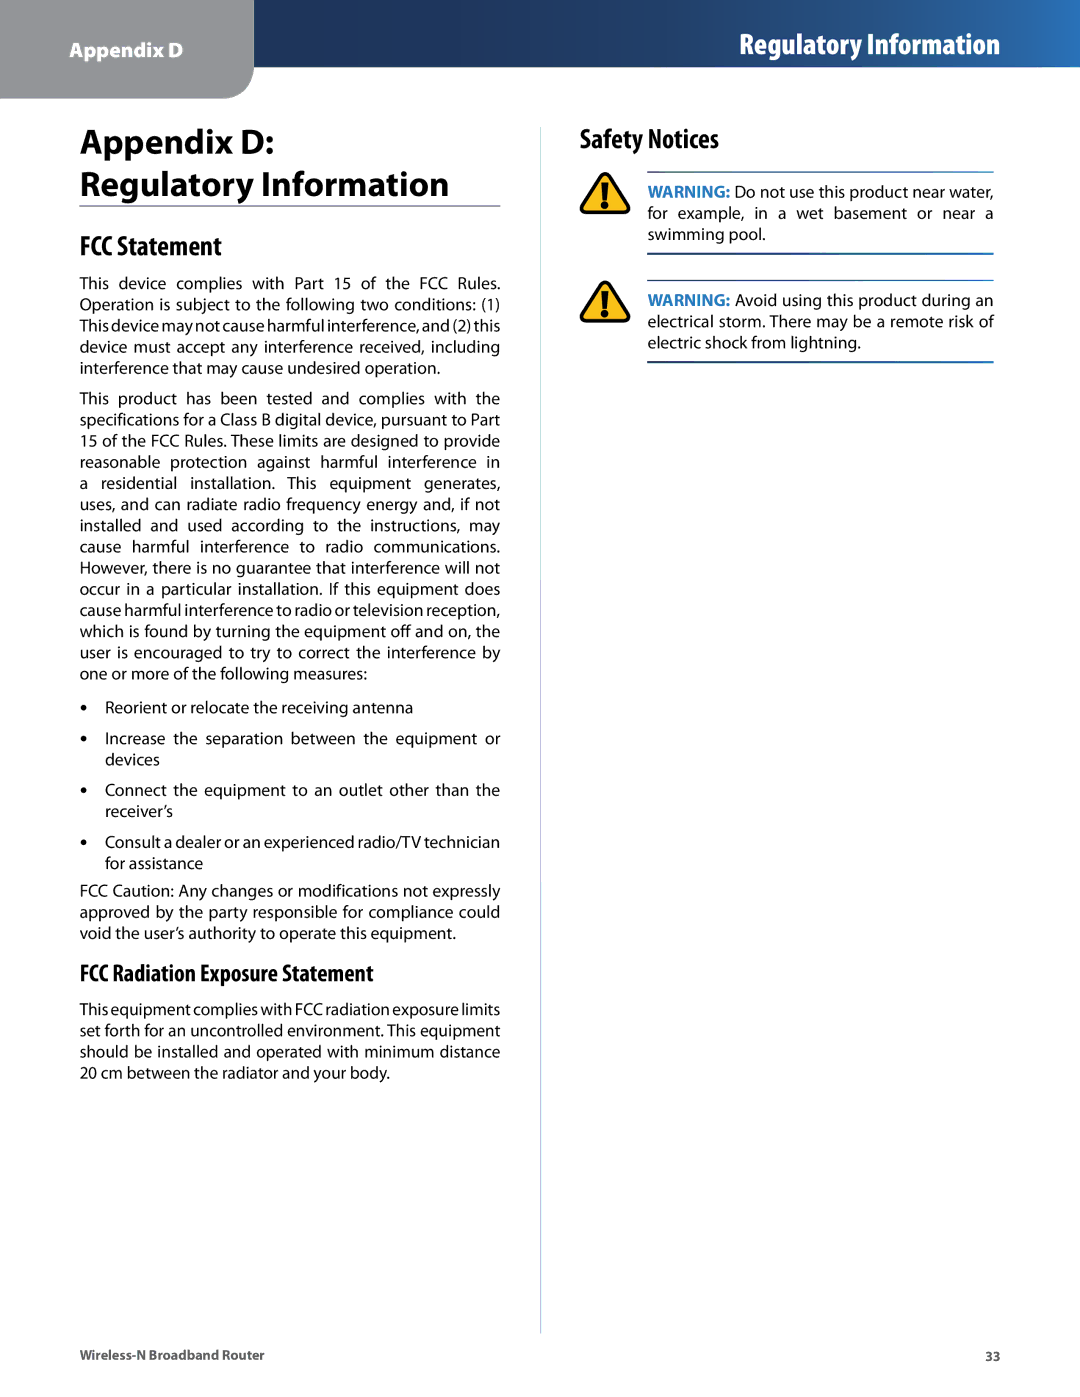 Linksys WRT160N manual FCC Statement, Safety Notices, FCC Radiation Exposure Statement 